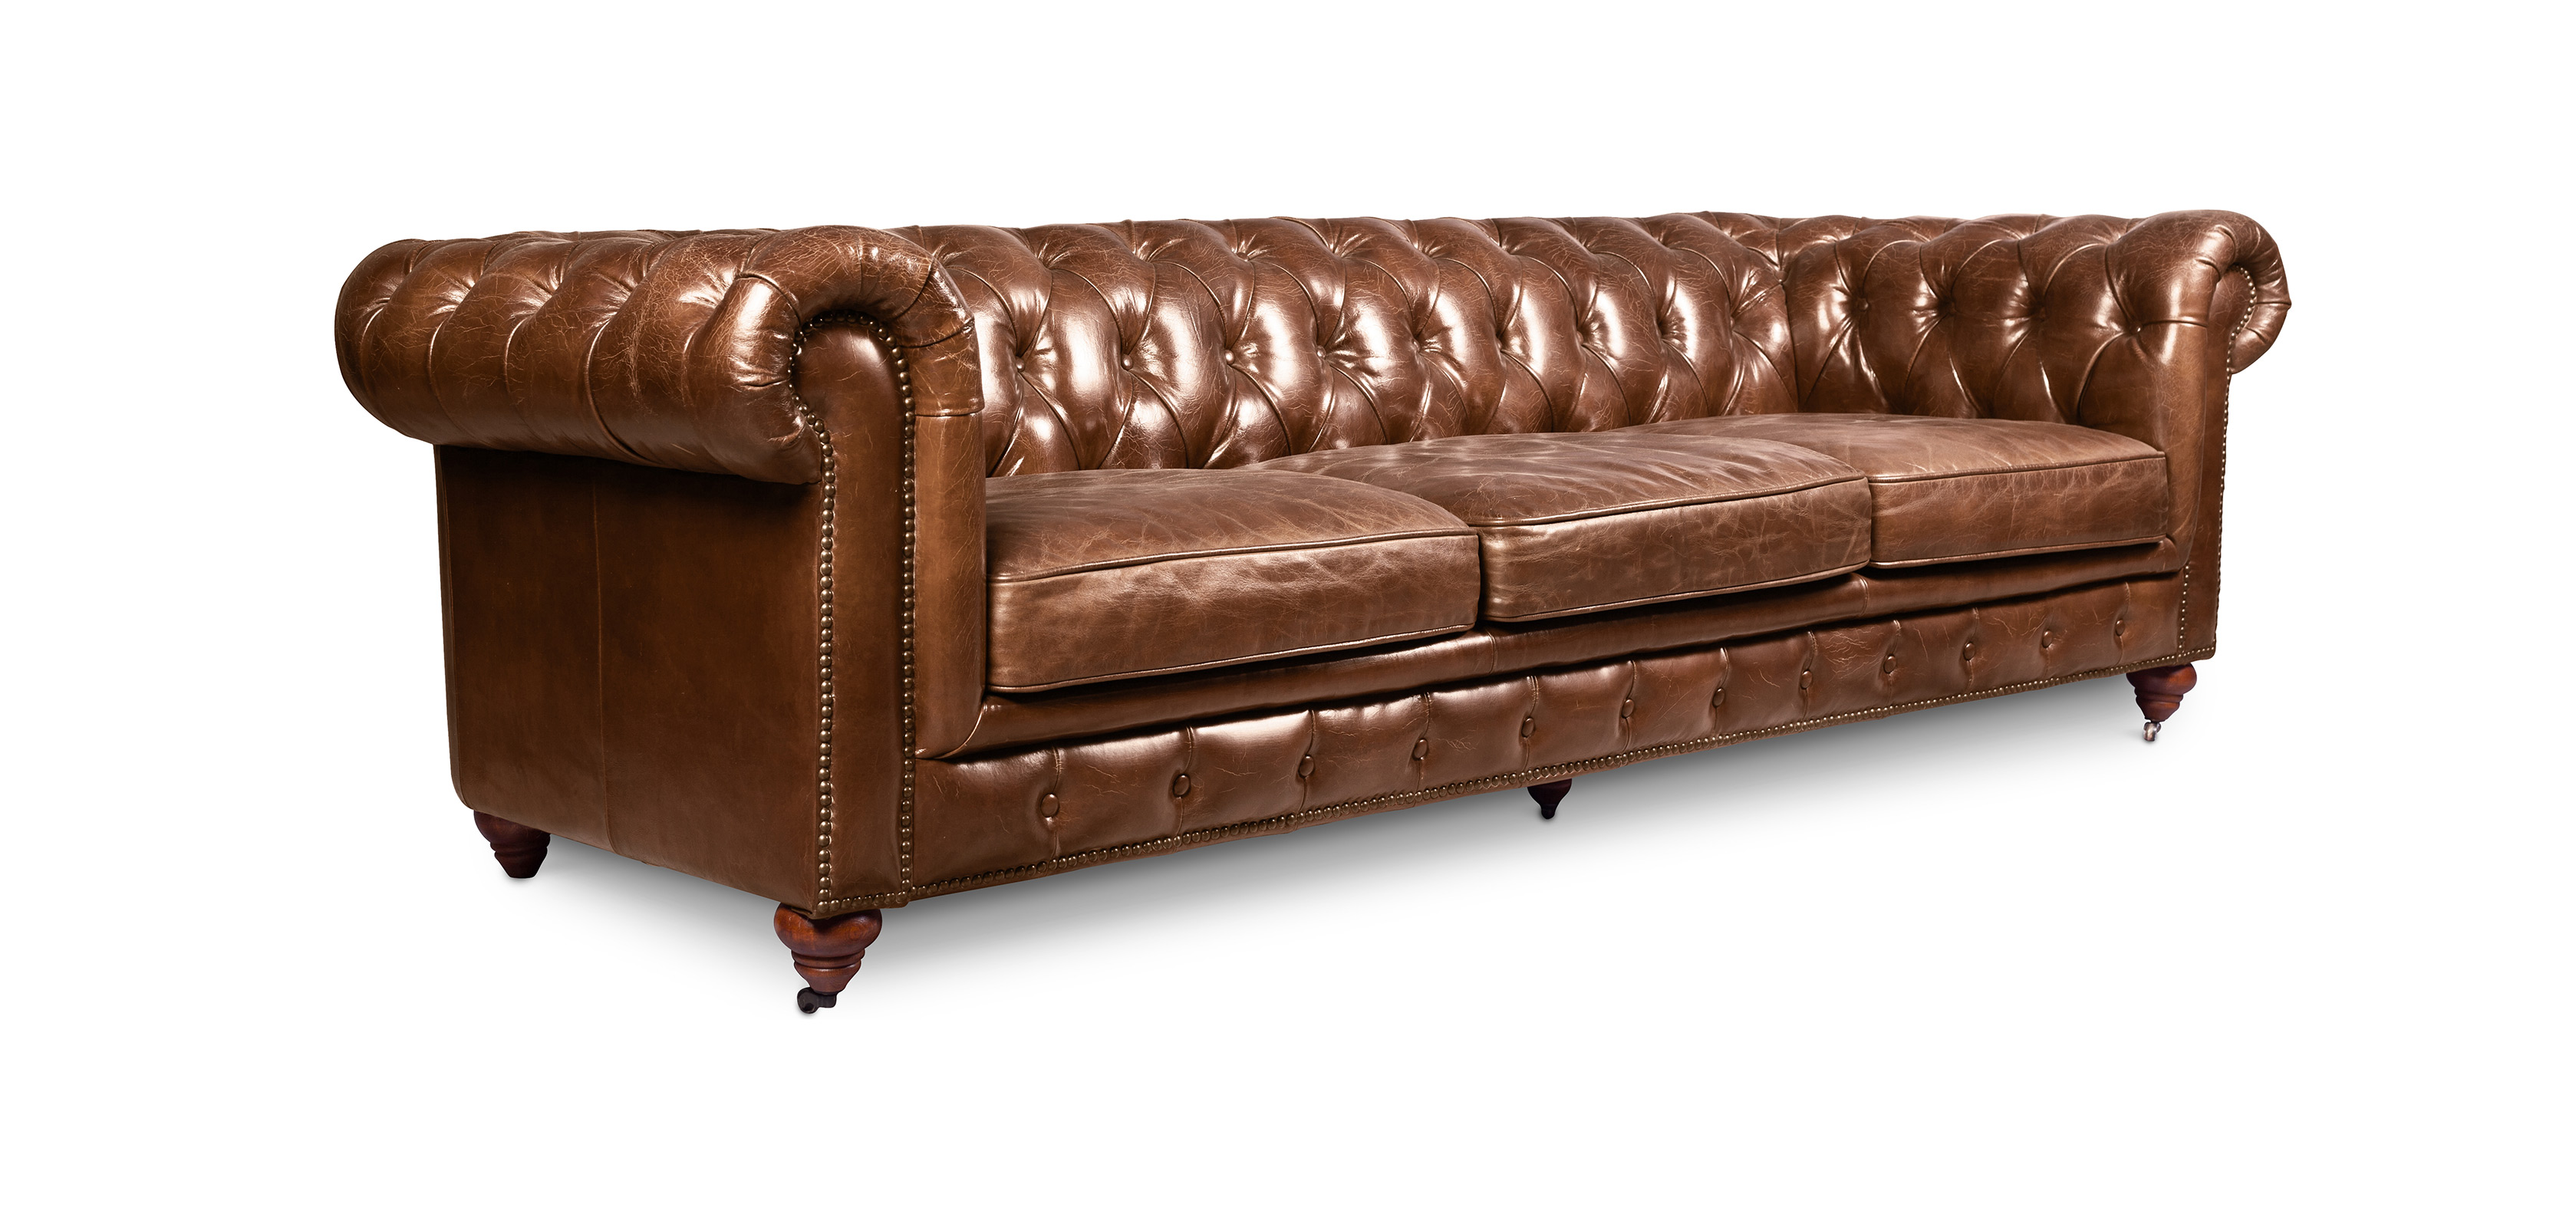 brown leather chesterfield sofa uk